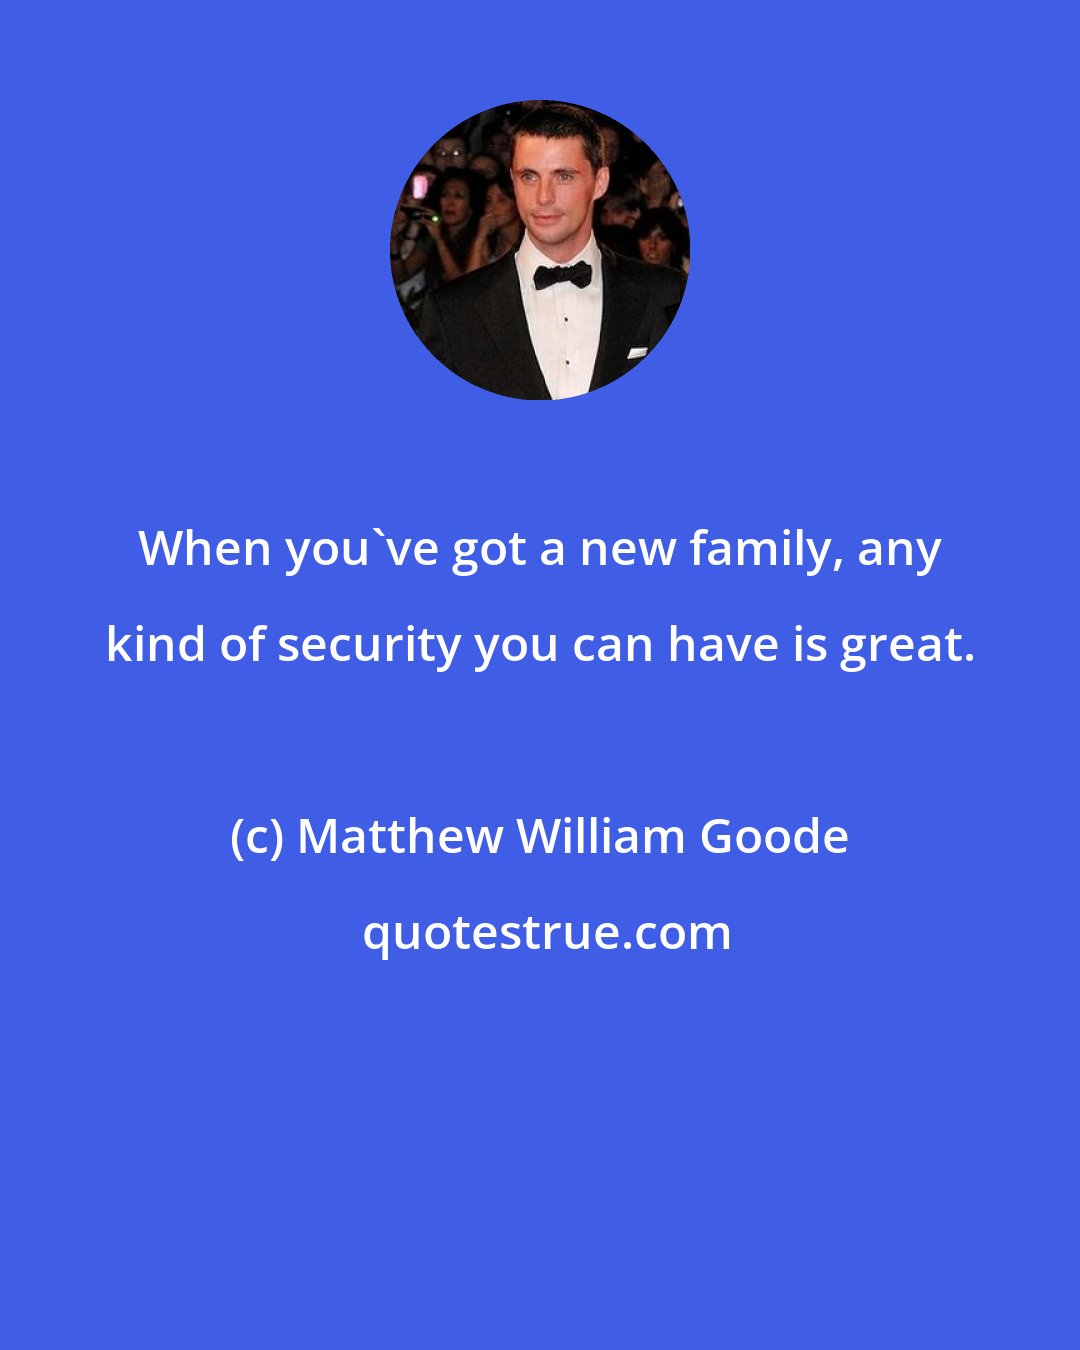 Matthew William Goode: When you've got a new family, any kind of security you can have is great.